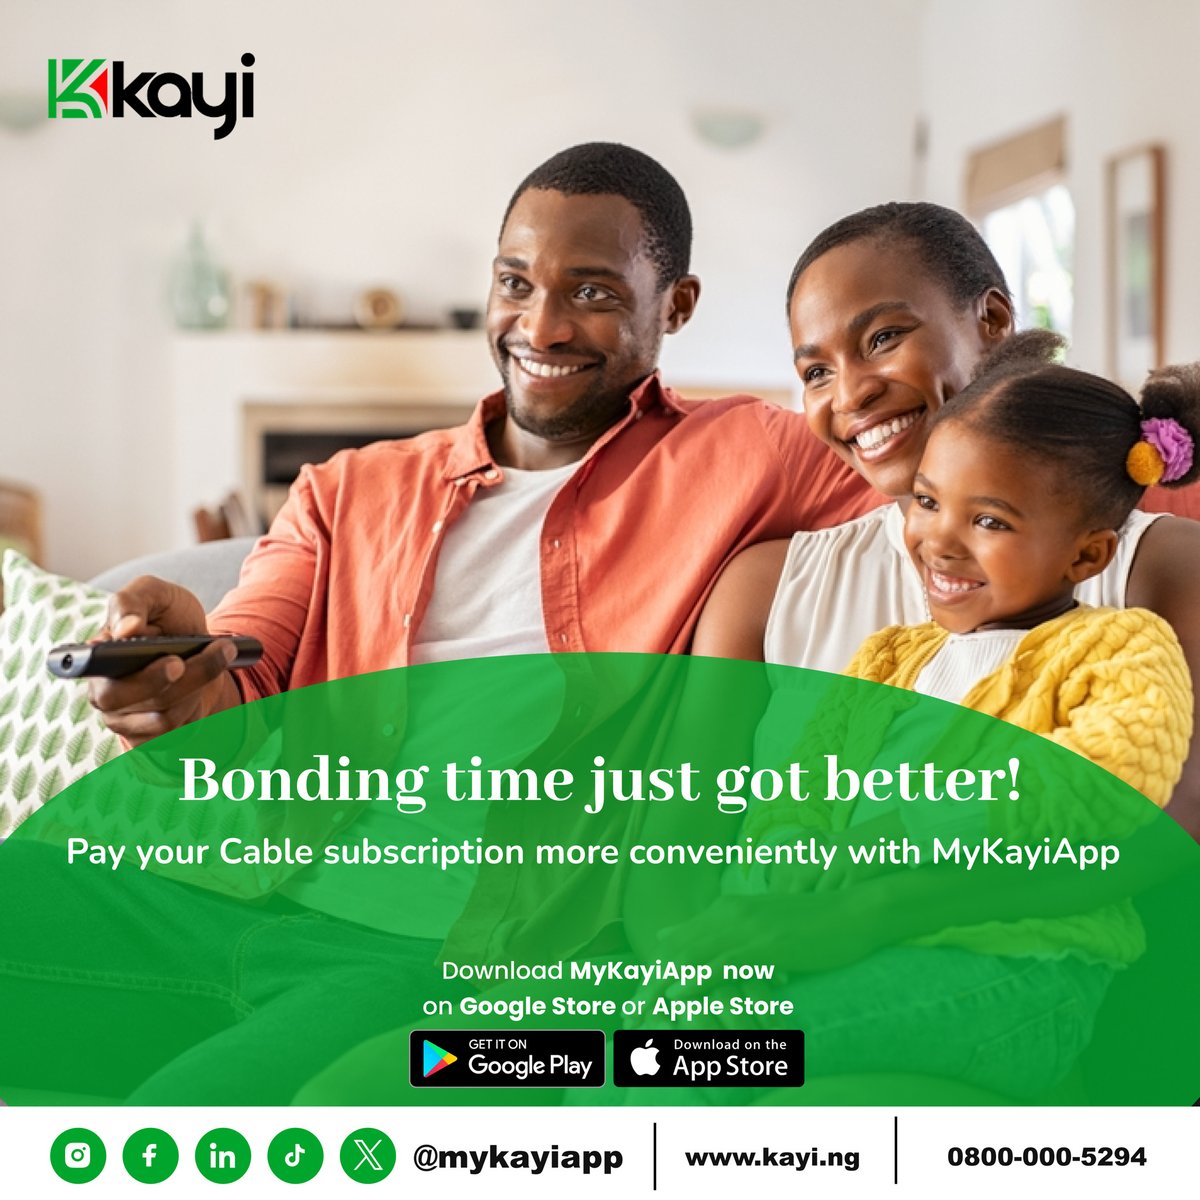 Entertainment made effortless millennials! With Kayiapp's cable TV subscription feature, access your favorite shows and channels with just a tap. Say hello to seamless entertainment, tailored to your tastes.

#MyKayiapp #CableTV #MillennialEntertainment
#Kayiway
#Digitalbanking